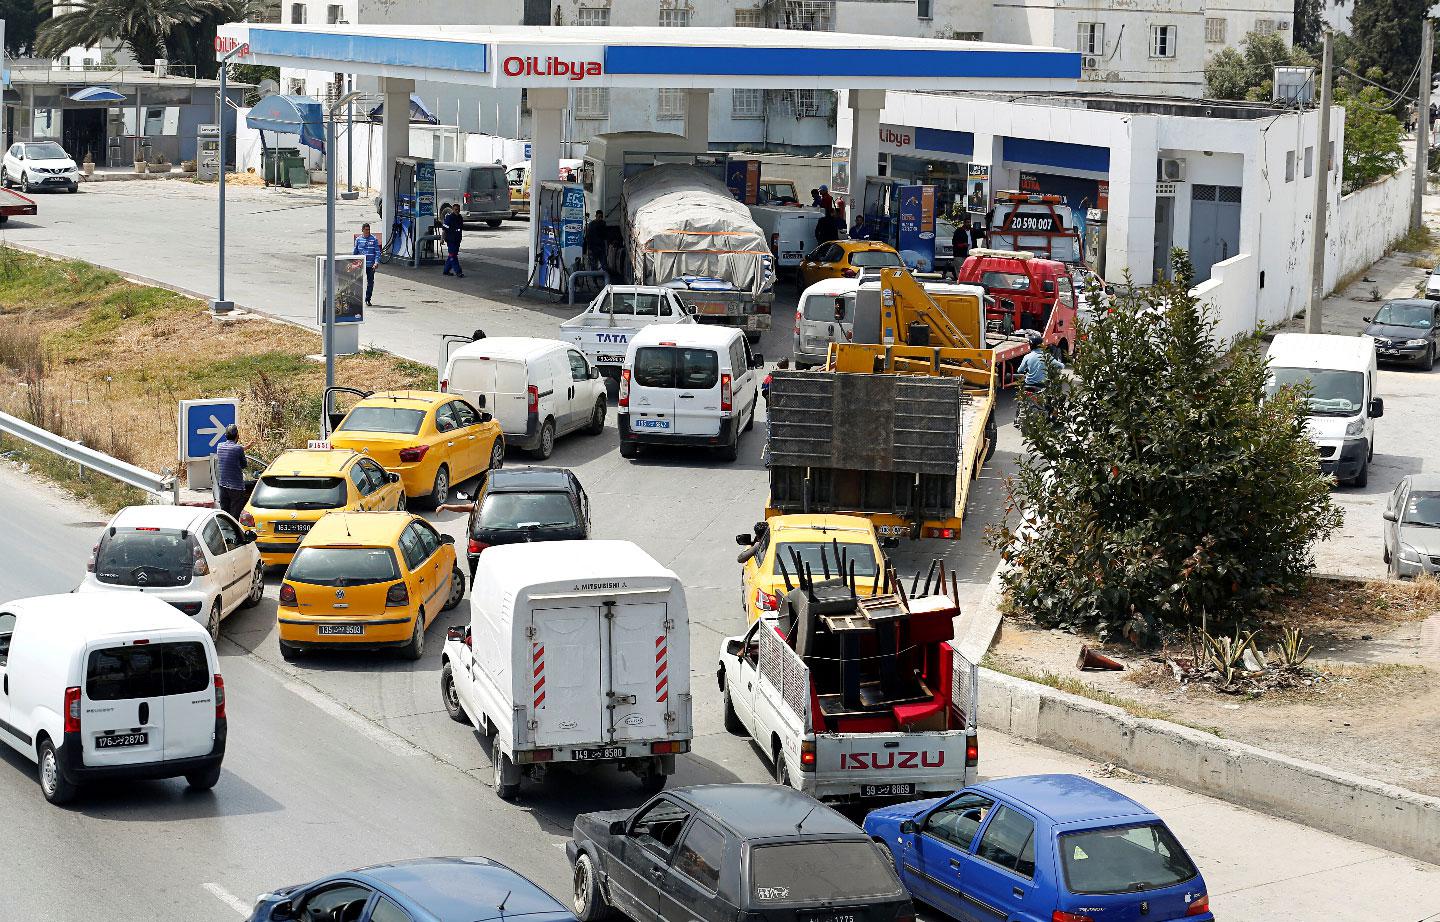 Automobiles line up for gasoline at a gas station in Tunis